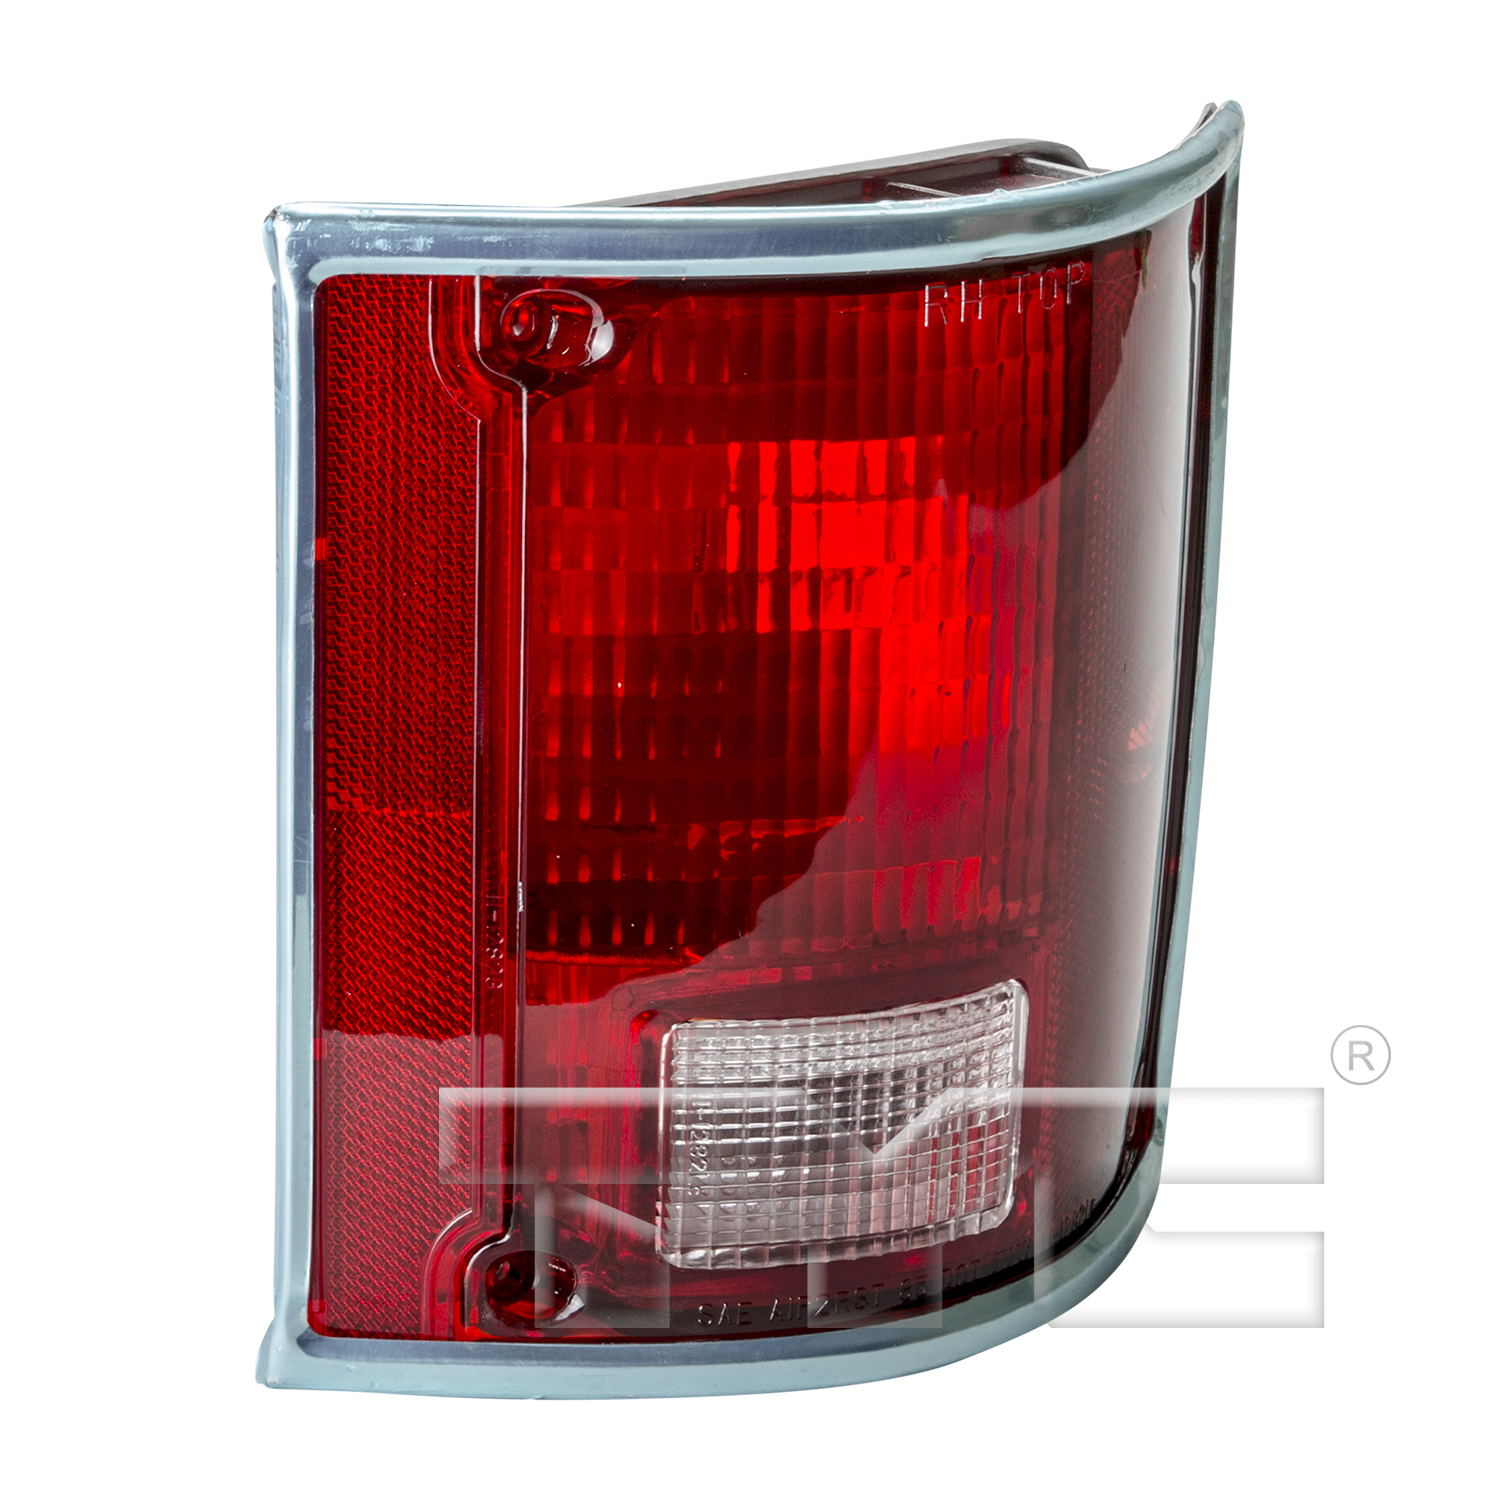 Aftermarket TAILLIGHTS for GMC - K3500, K3500,79-91,RT Taillamp assy